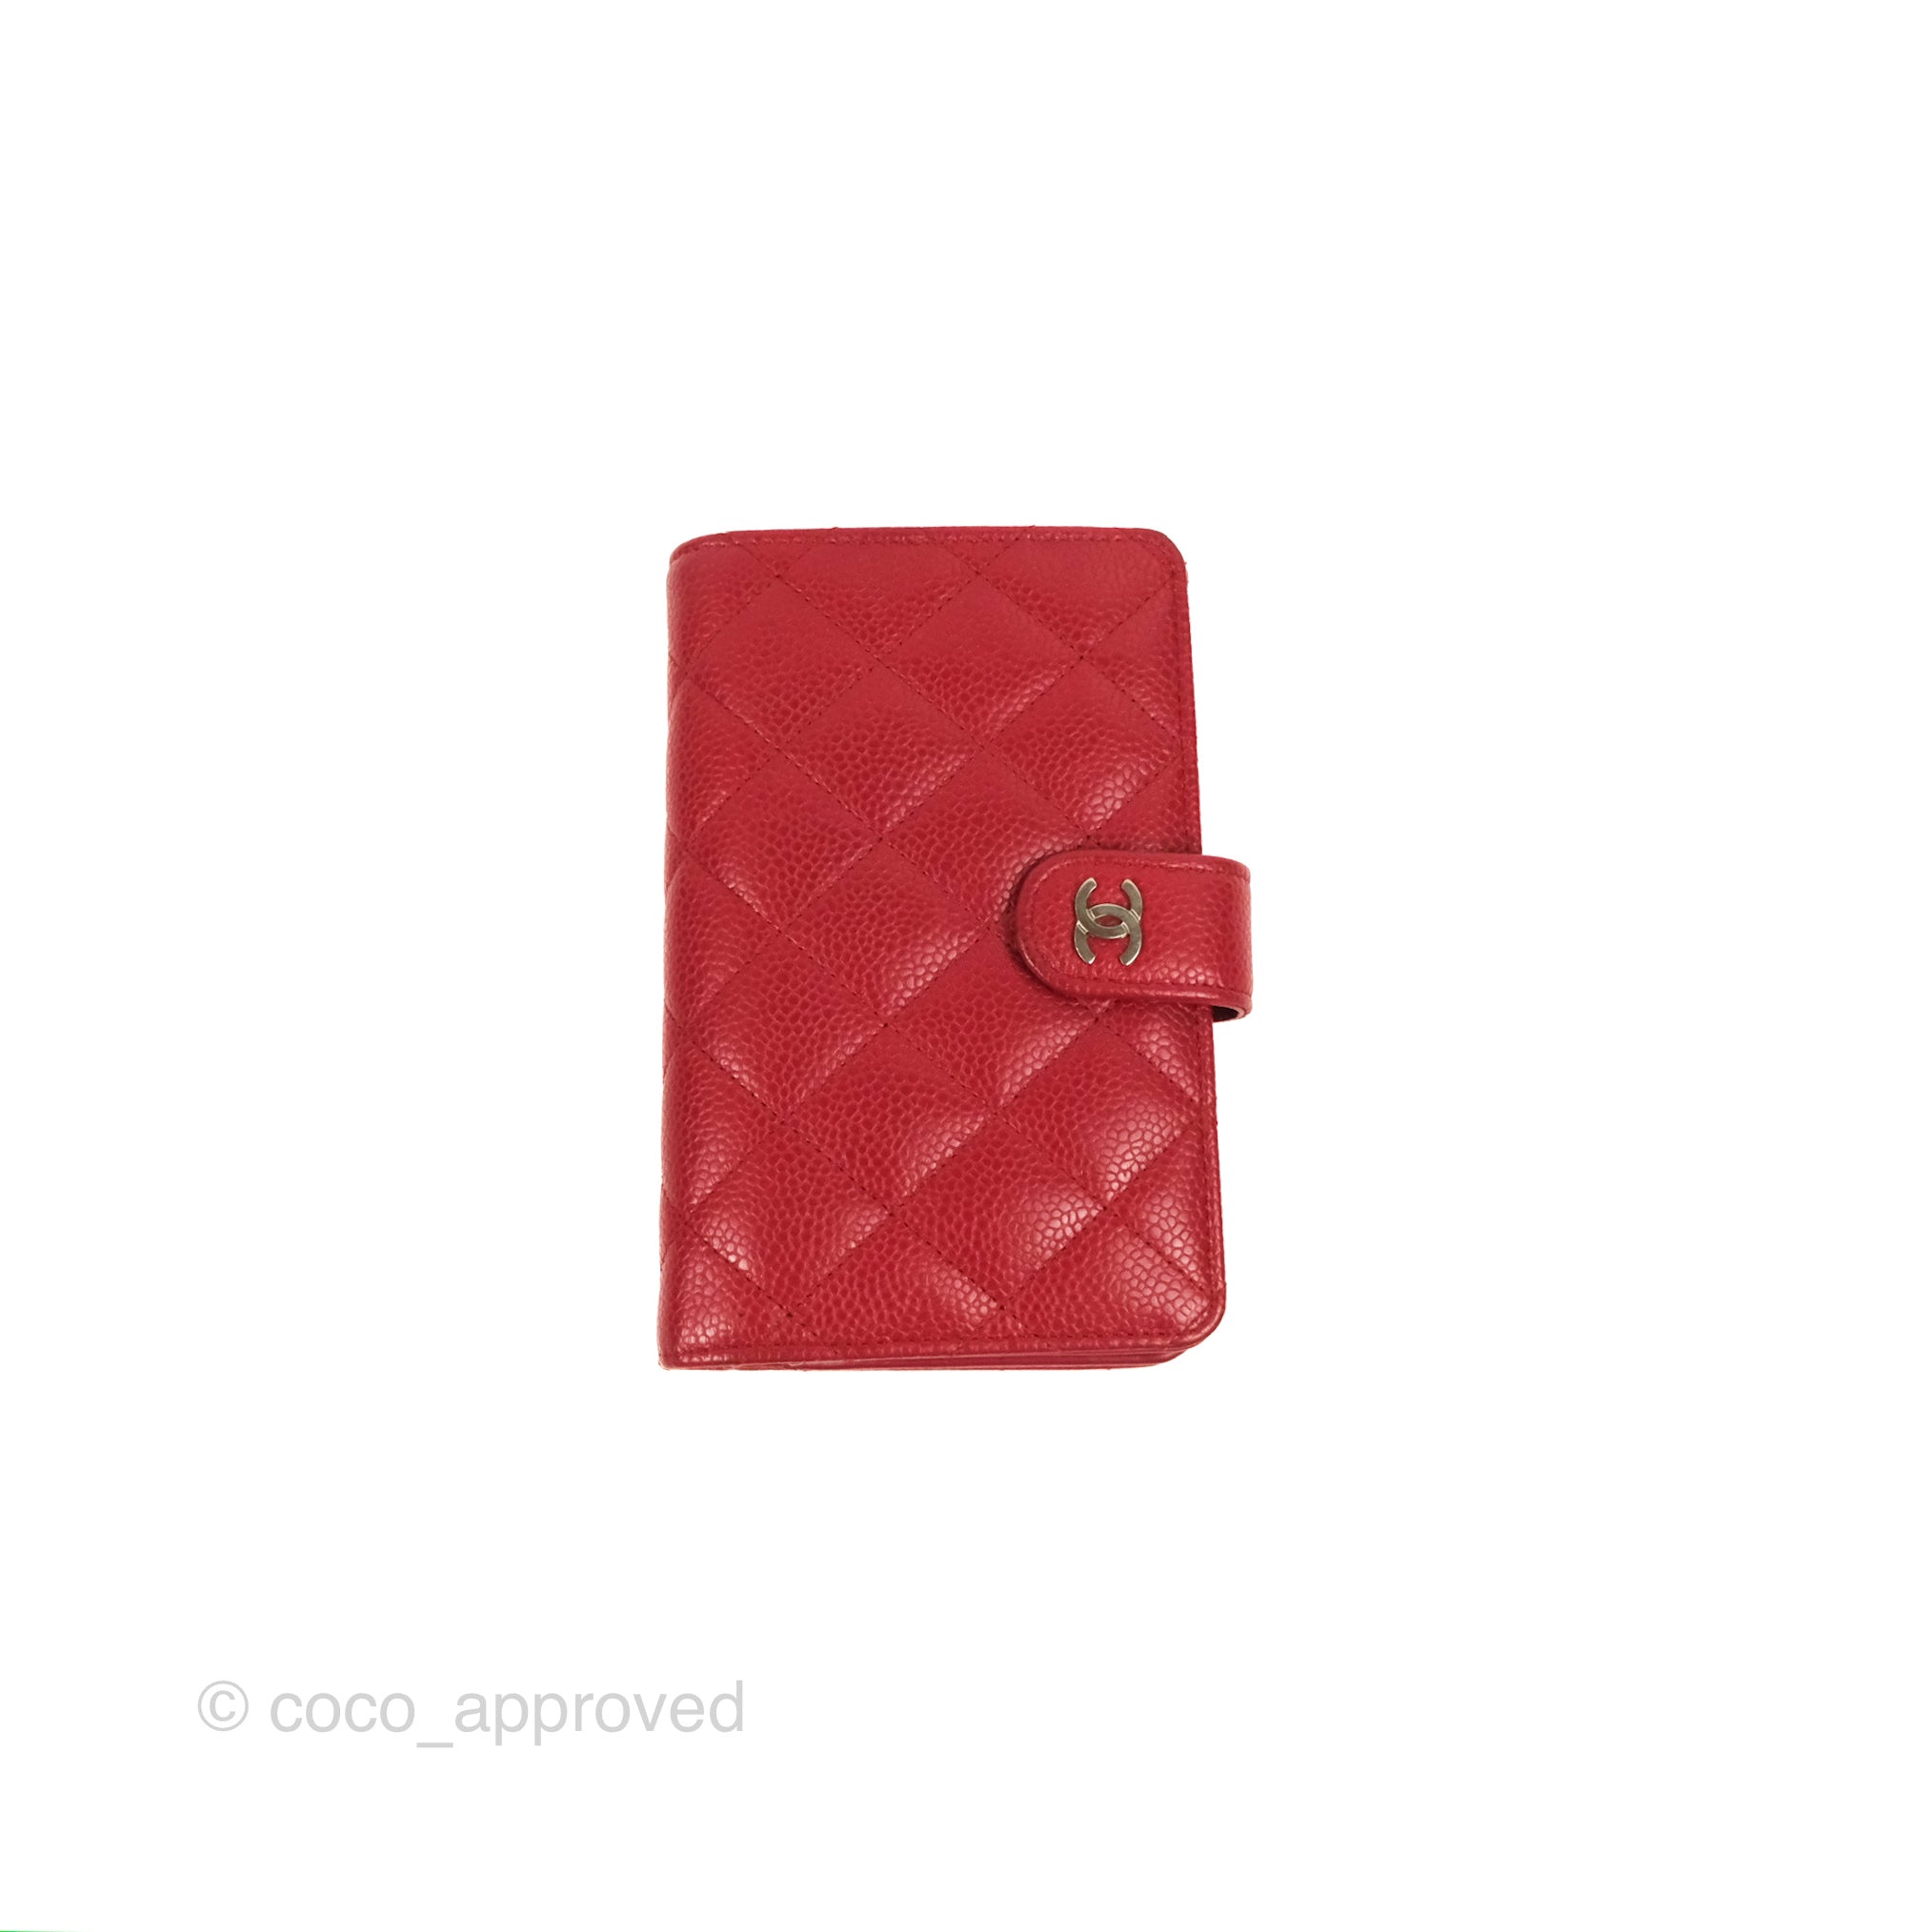 Sold at Auction: Vintage Gucci Red Leather Checkbook Cover